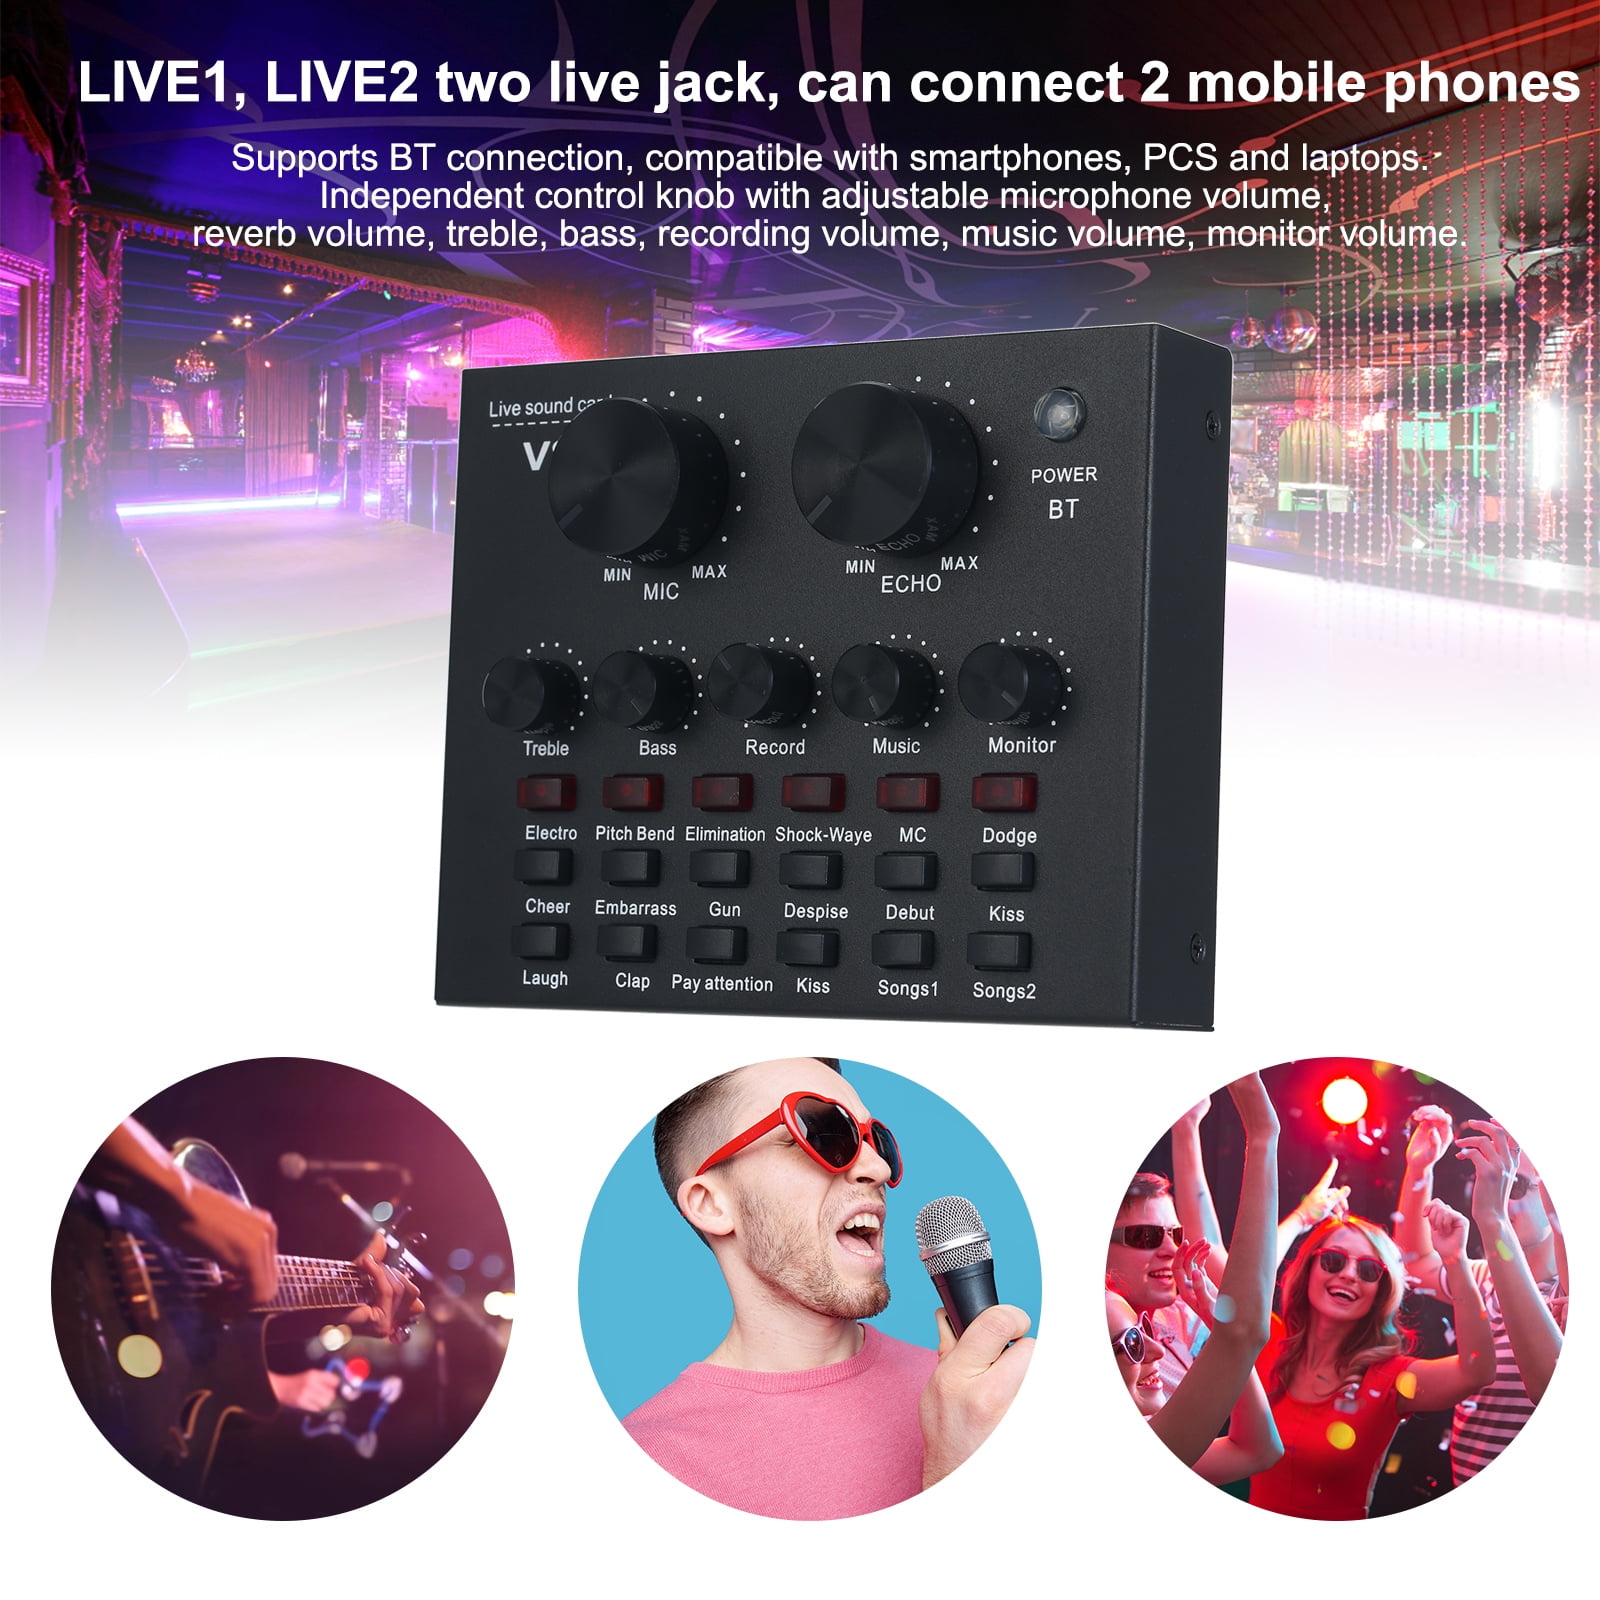 V8-Live Sound Card Audio Mixer USB External Sound Card Headset Microphone Live Sound Card Karaoke for Double Cell Phone Live Computer PC Live Recording Home KTV Voice Chat 